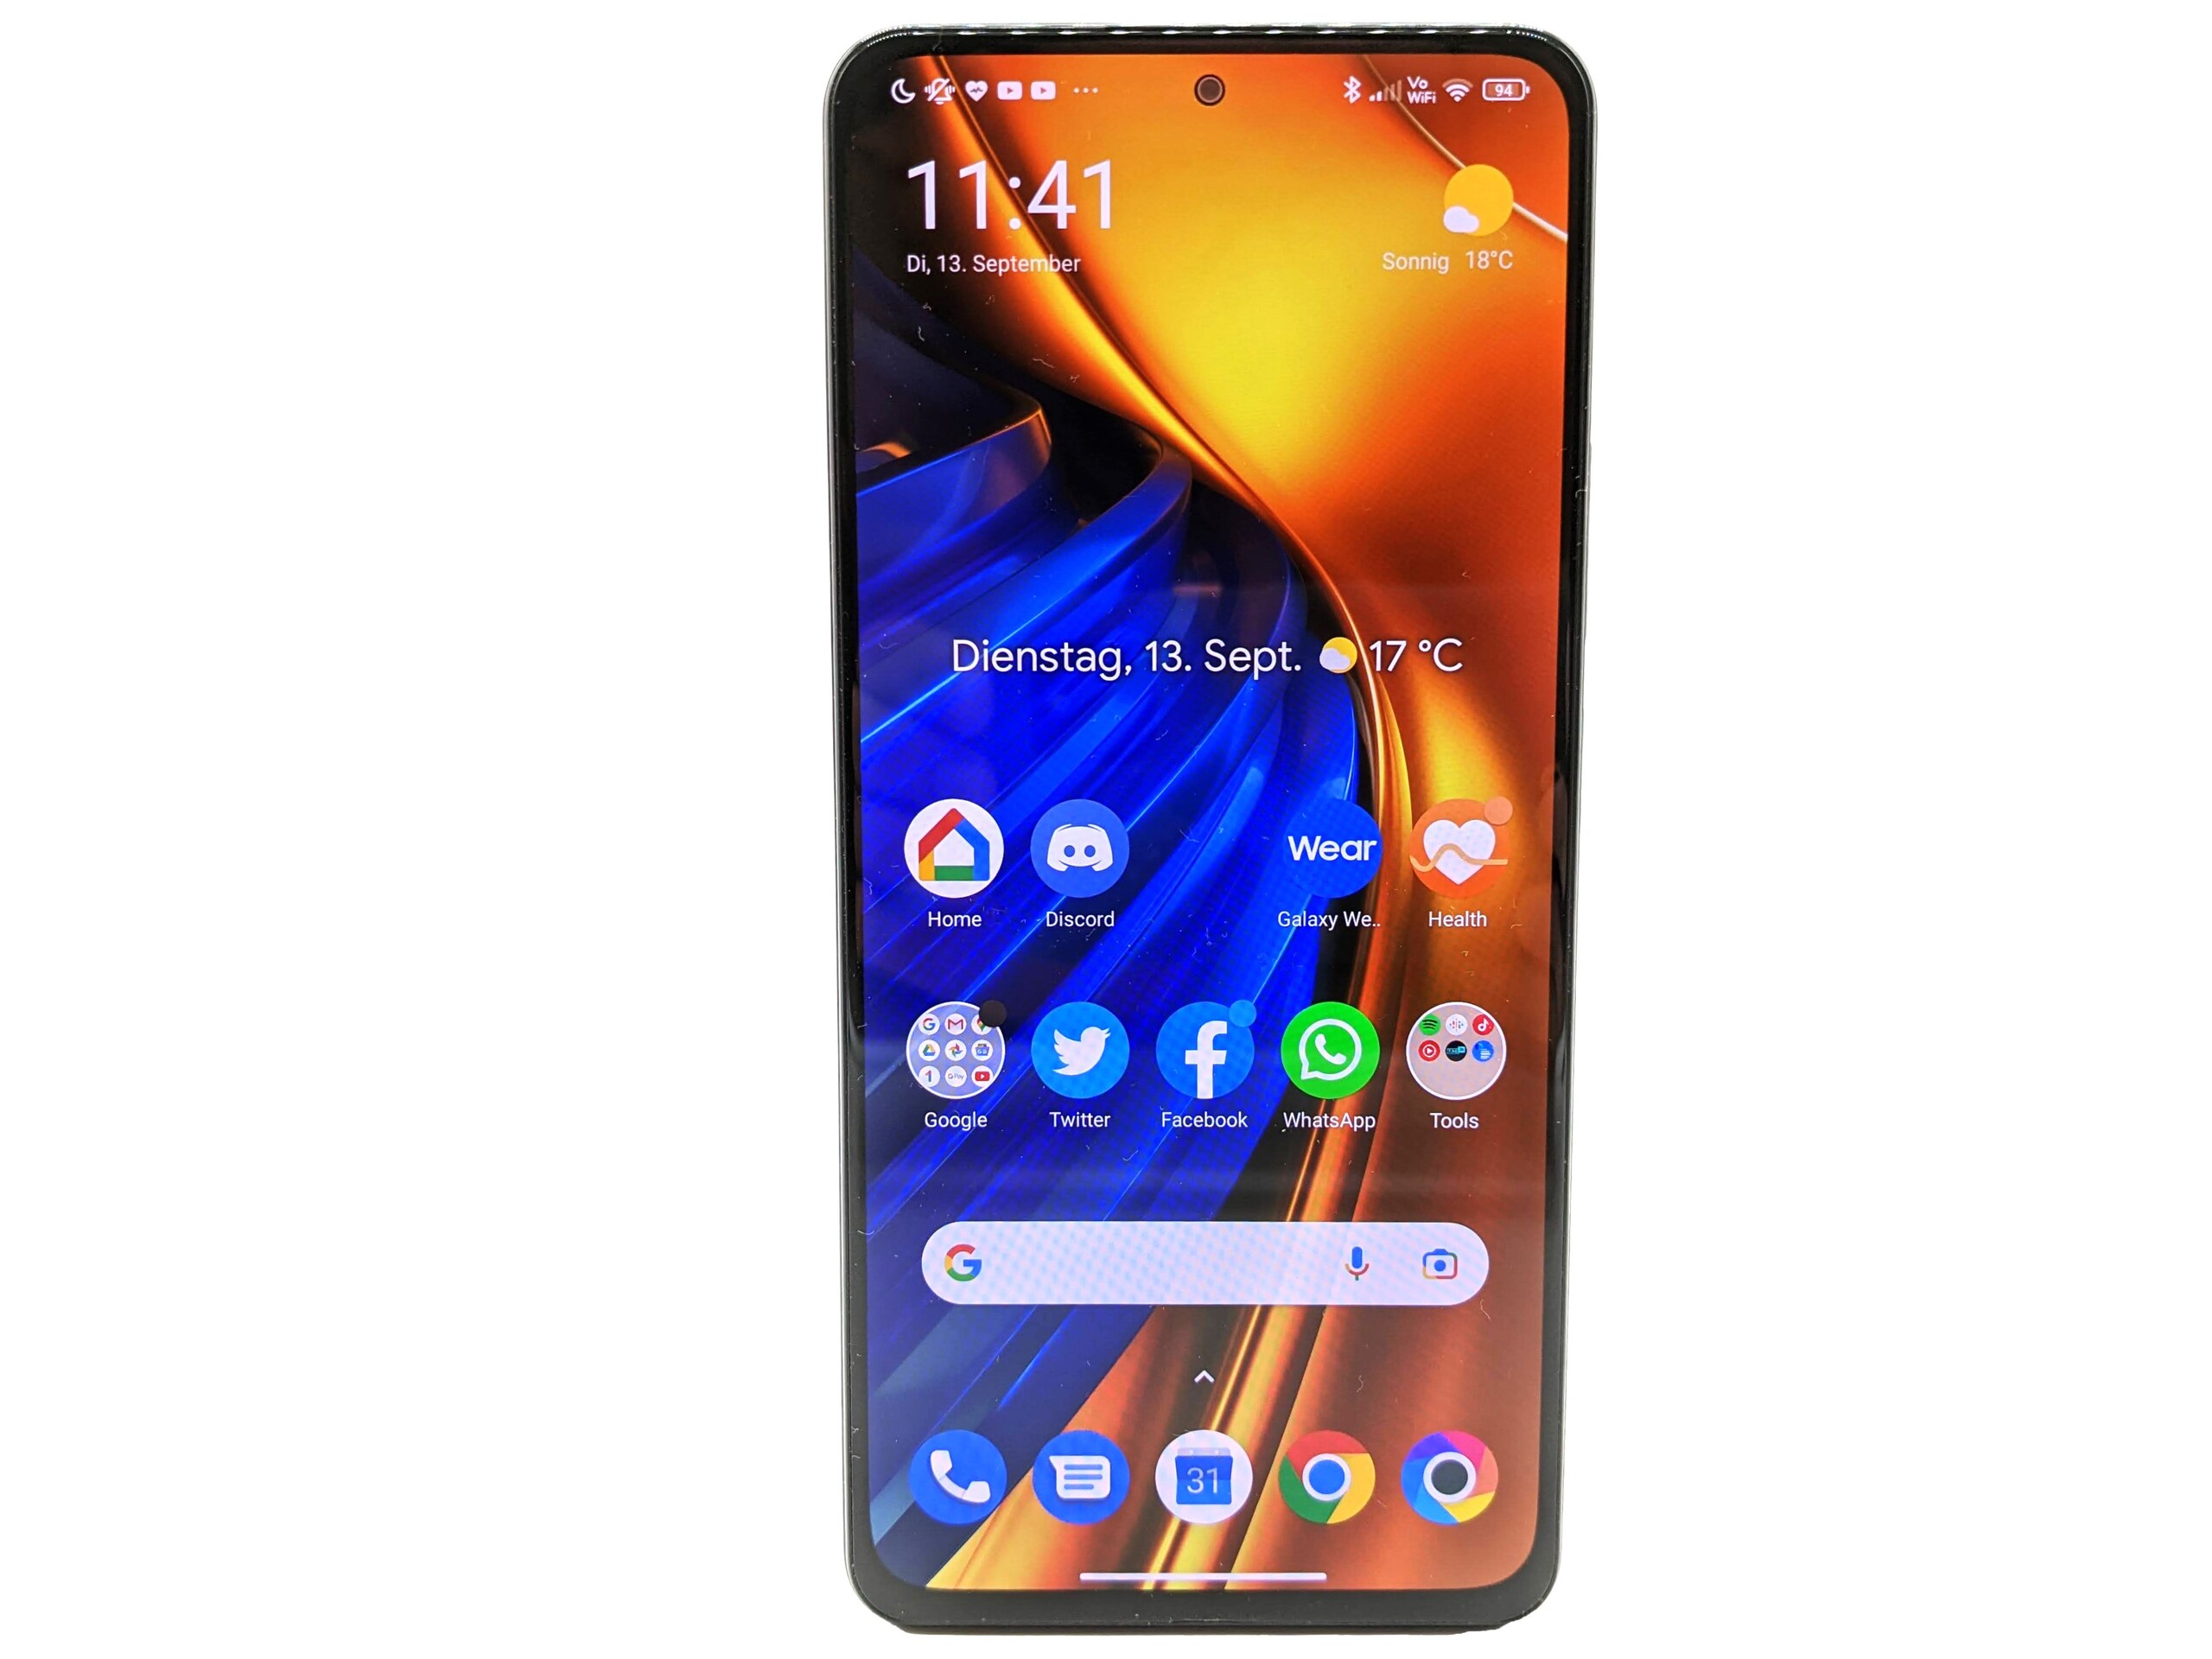 Big Poco F4 5G discount announced; get it with this